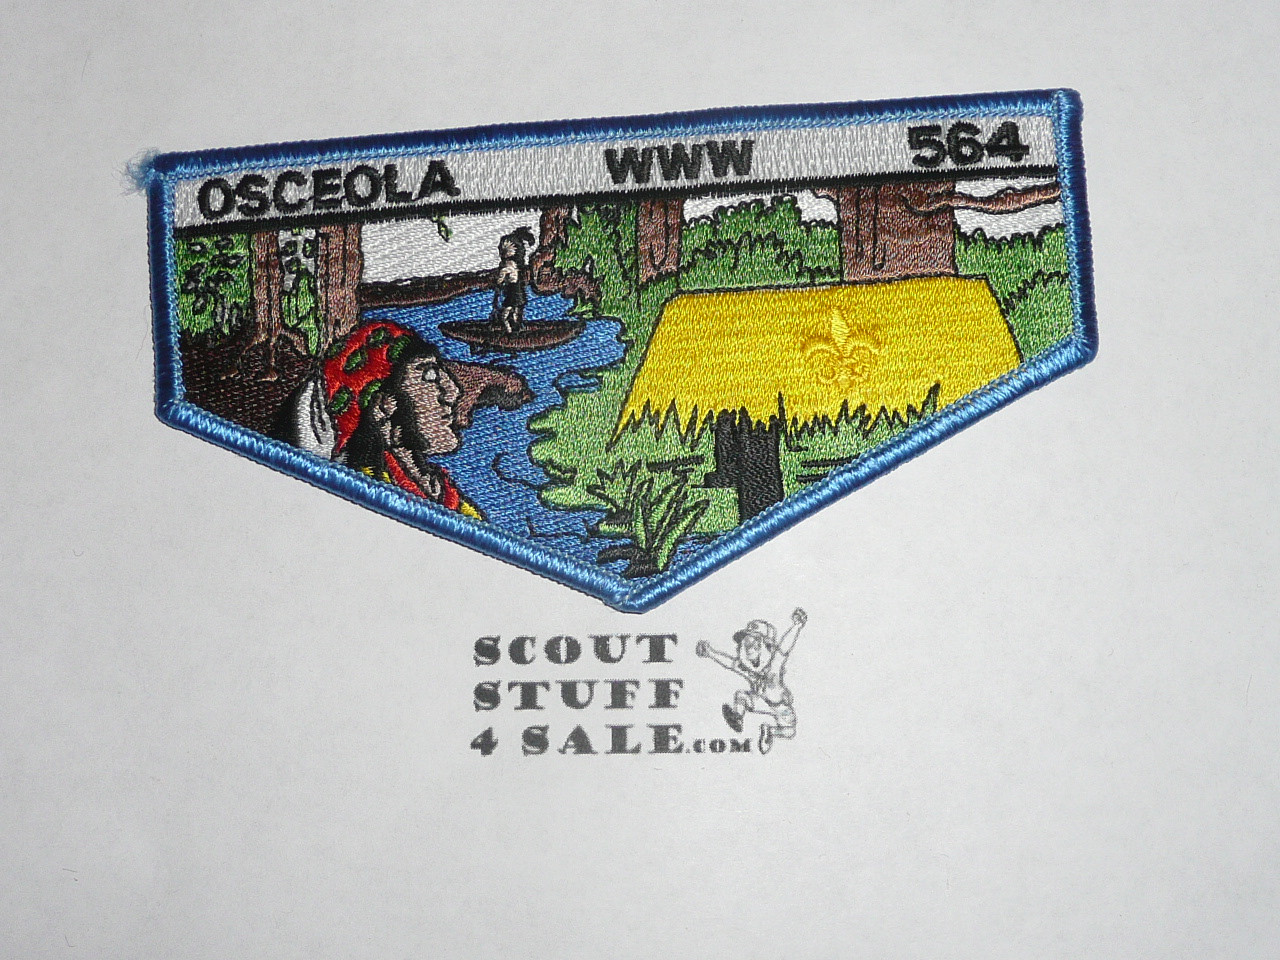 Order of the Arrow Lodge #564 Osceola s25 Flap Patch